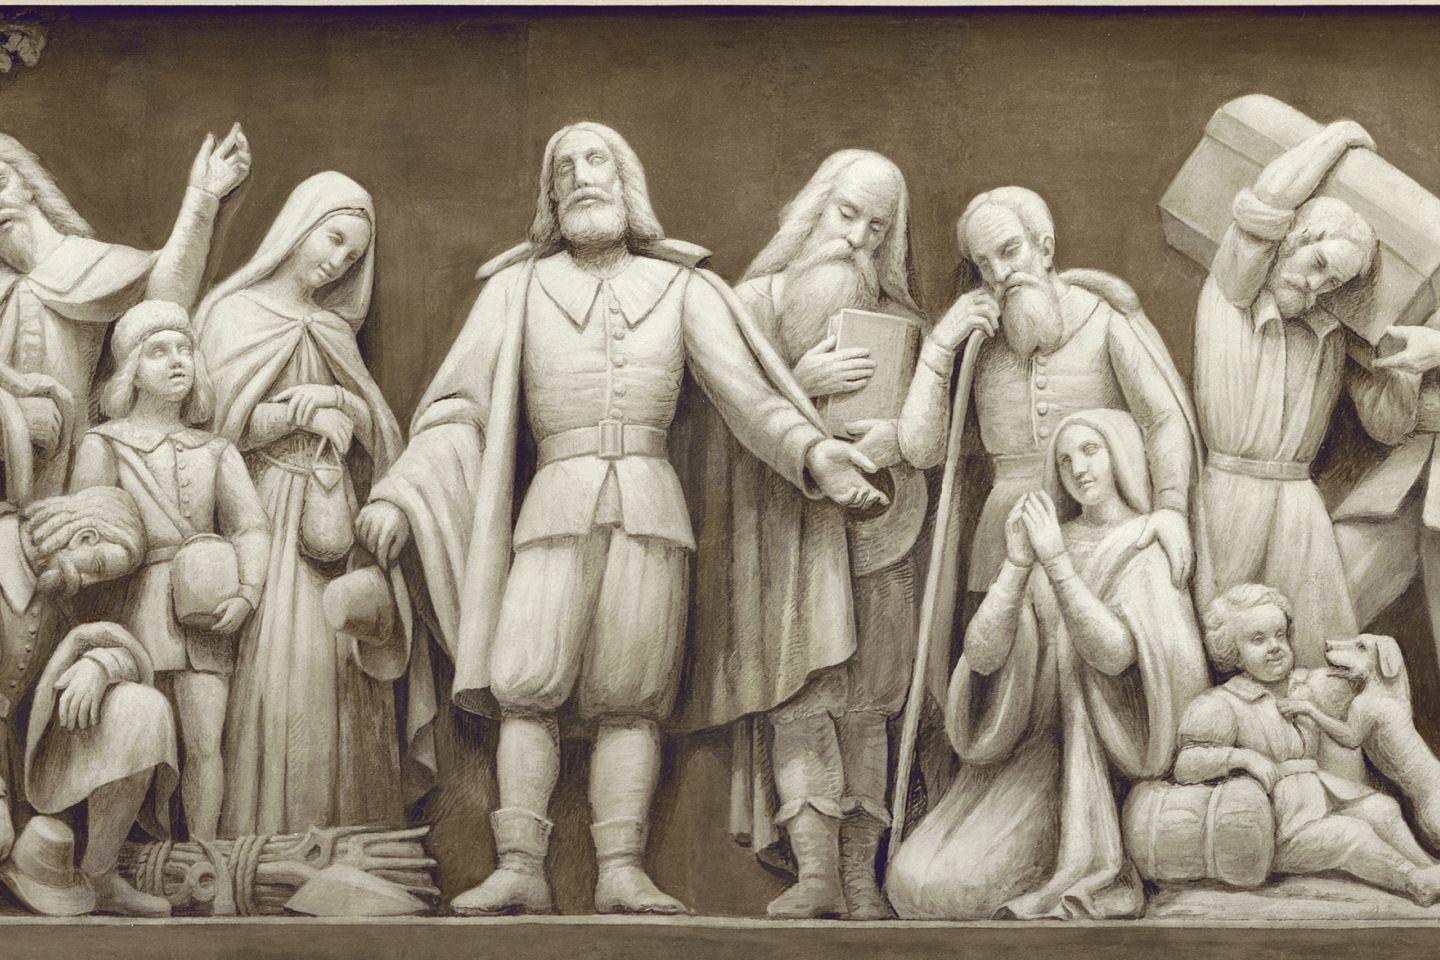 Pilgrims, led by William Brewster, shown giving thanks for their safe voyage/Frieze in the Rotunda of the United States Capitol